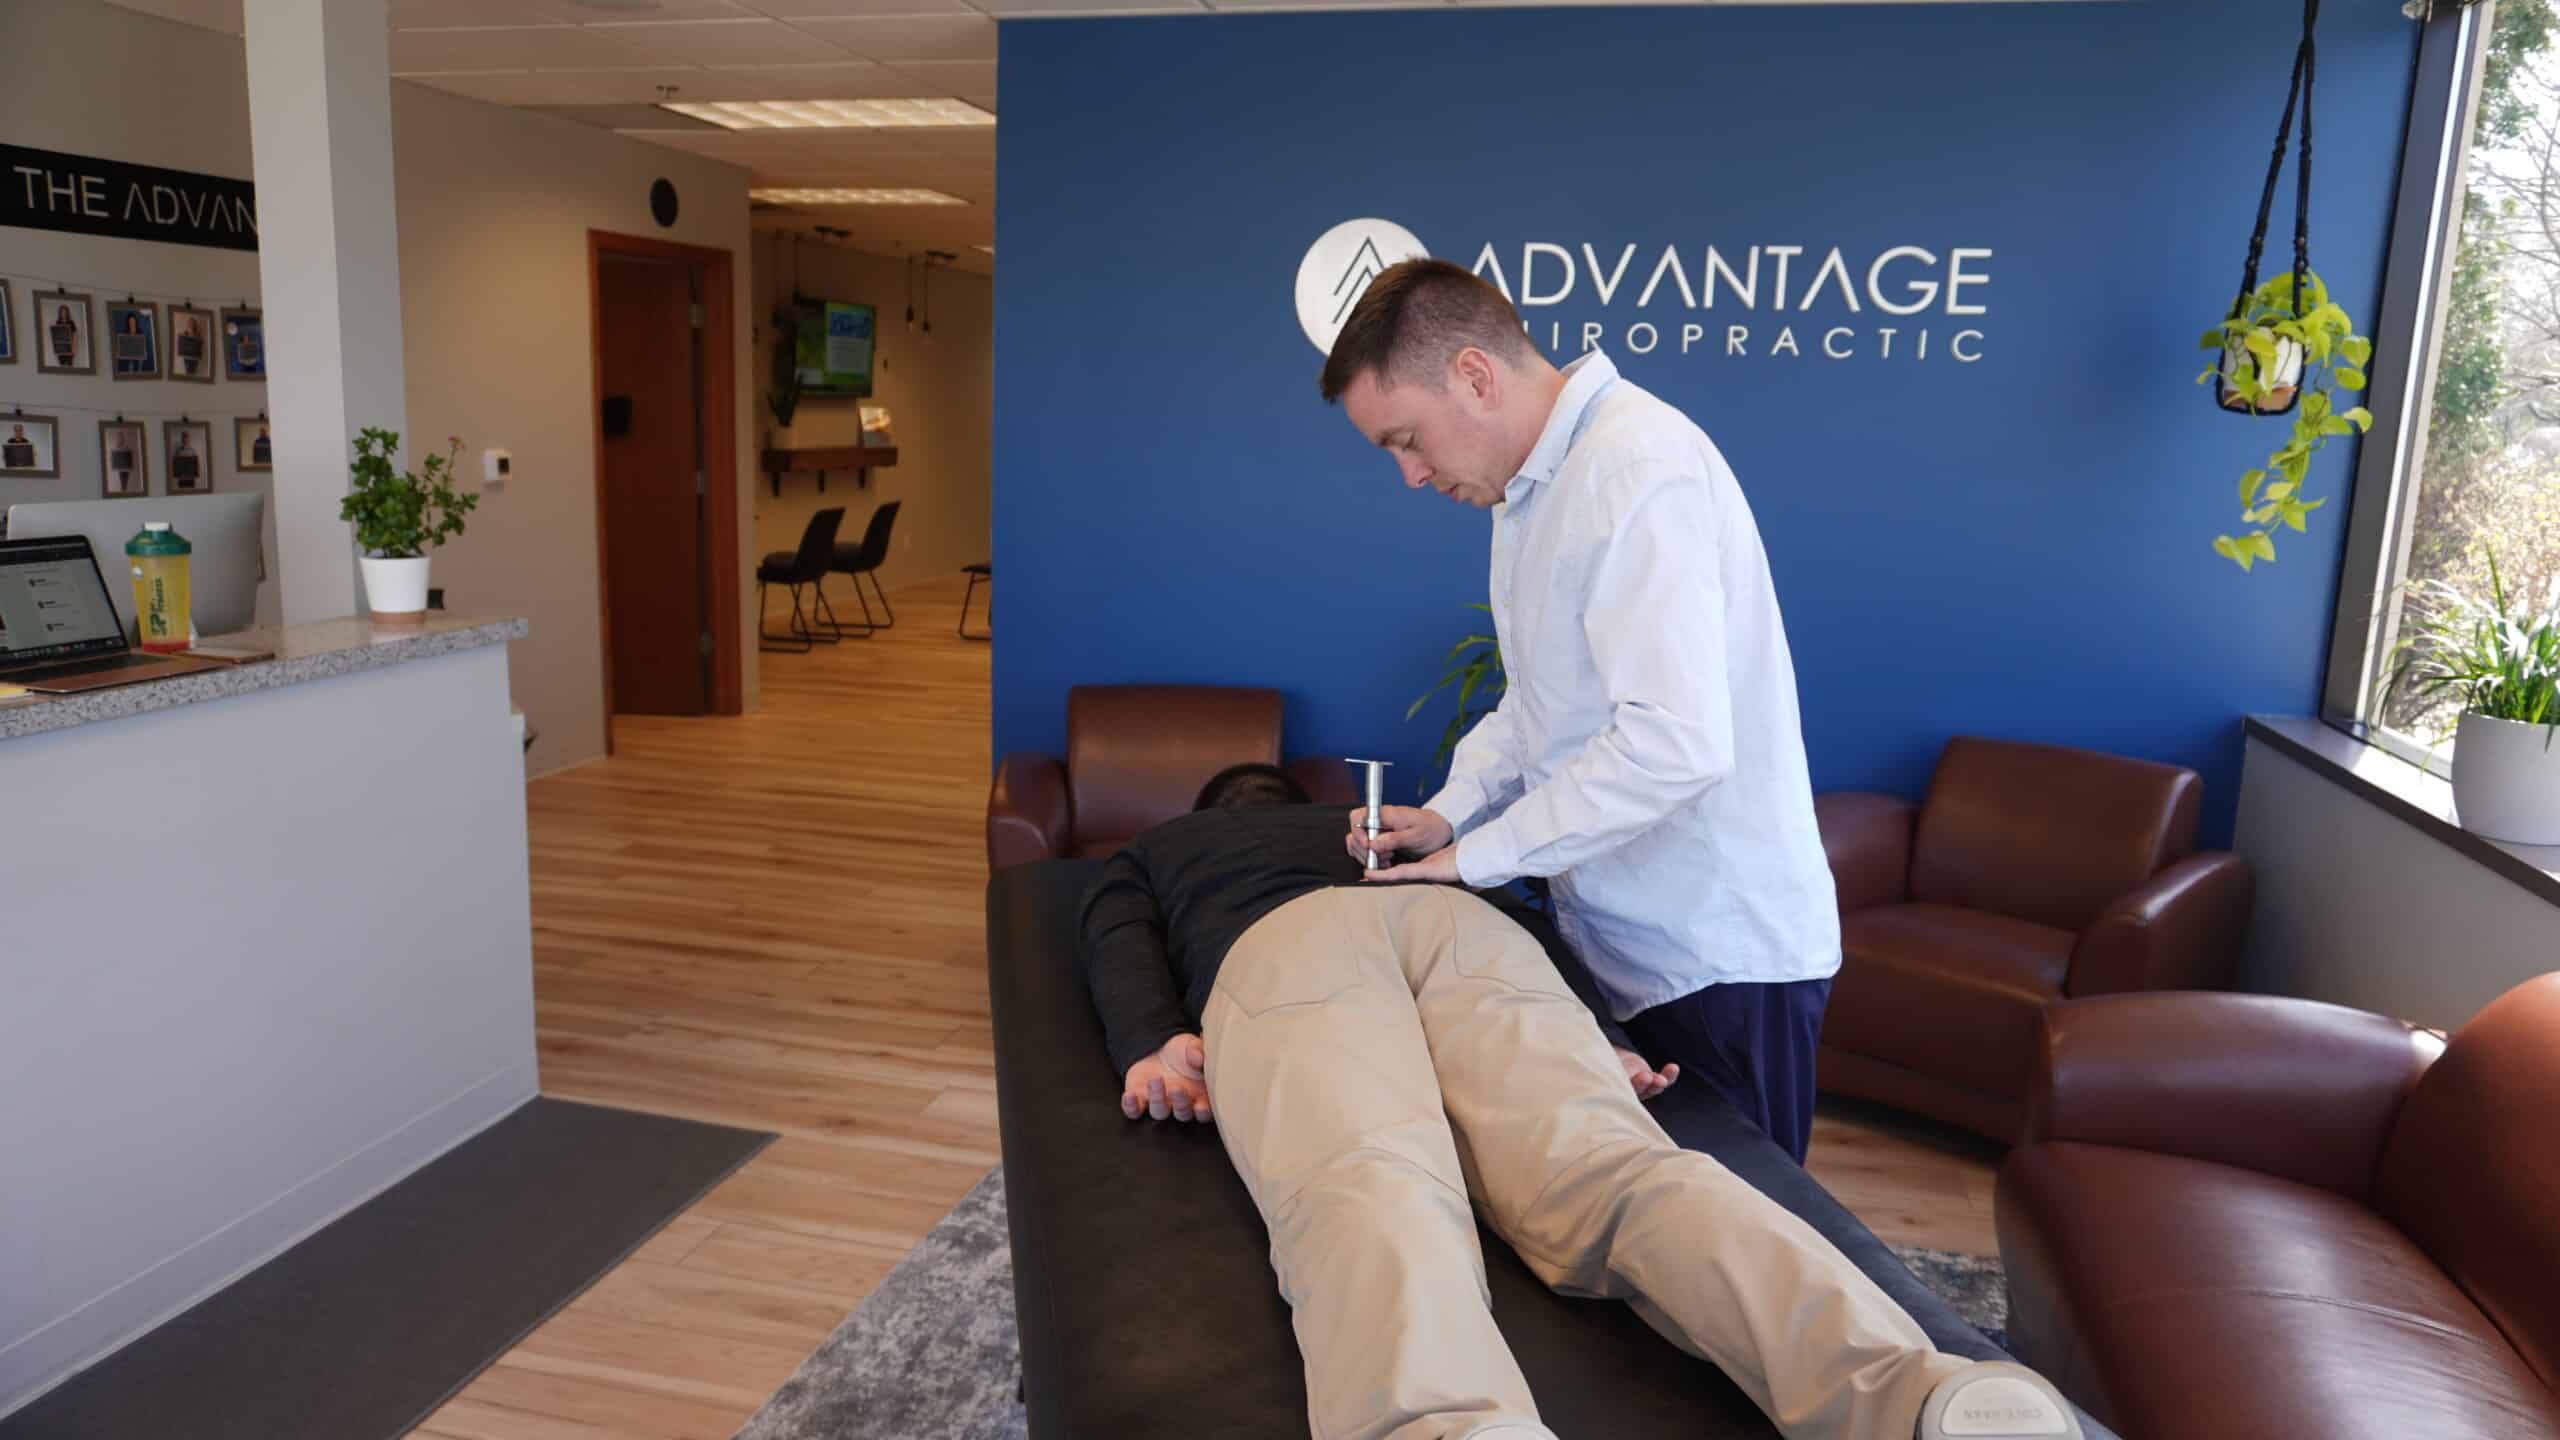 Advantage Chiropractic doctor adjust patient spine in their clinic near brookfield wi